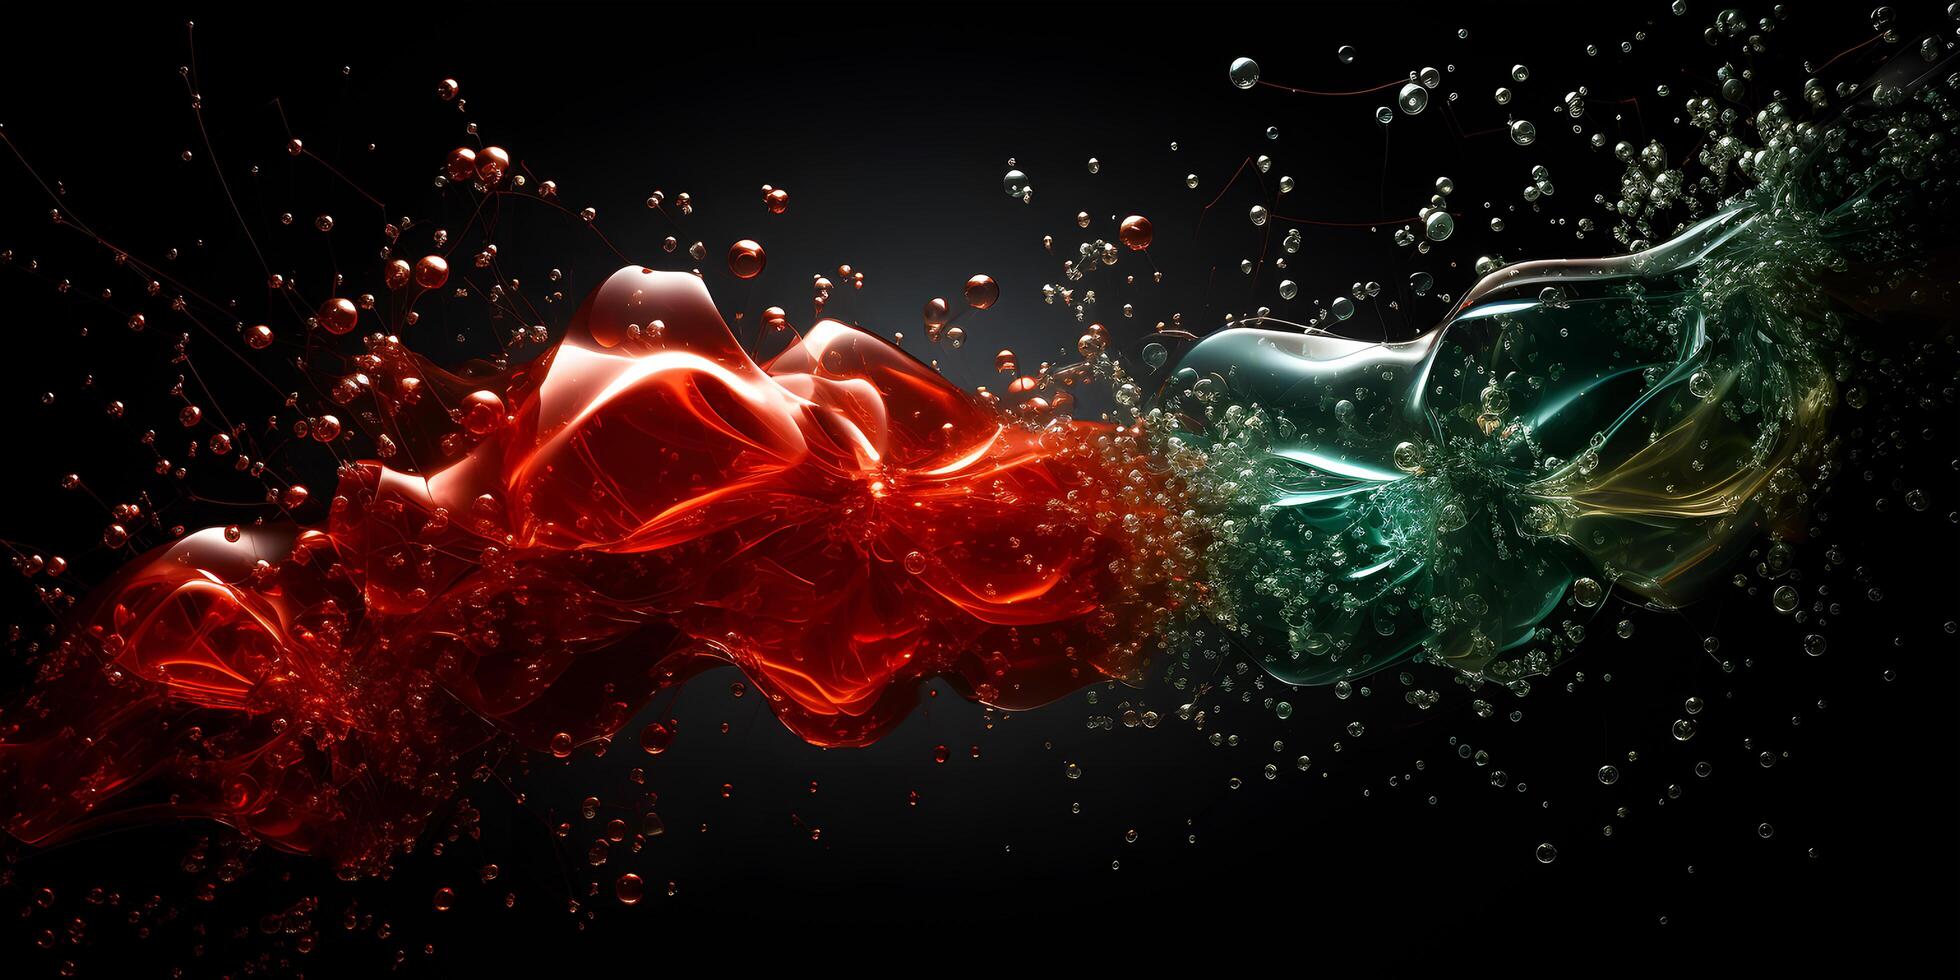 AI generated A dynamic interplay of red and green hues with bubbles in a fluid, abstract art form photo